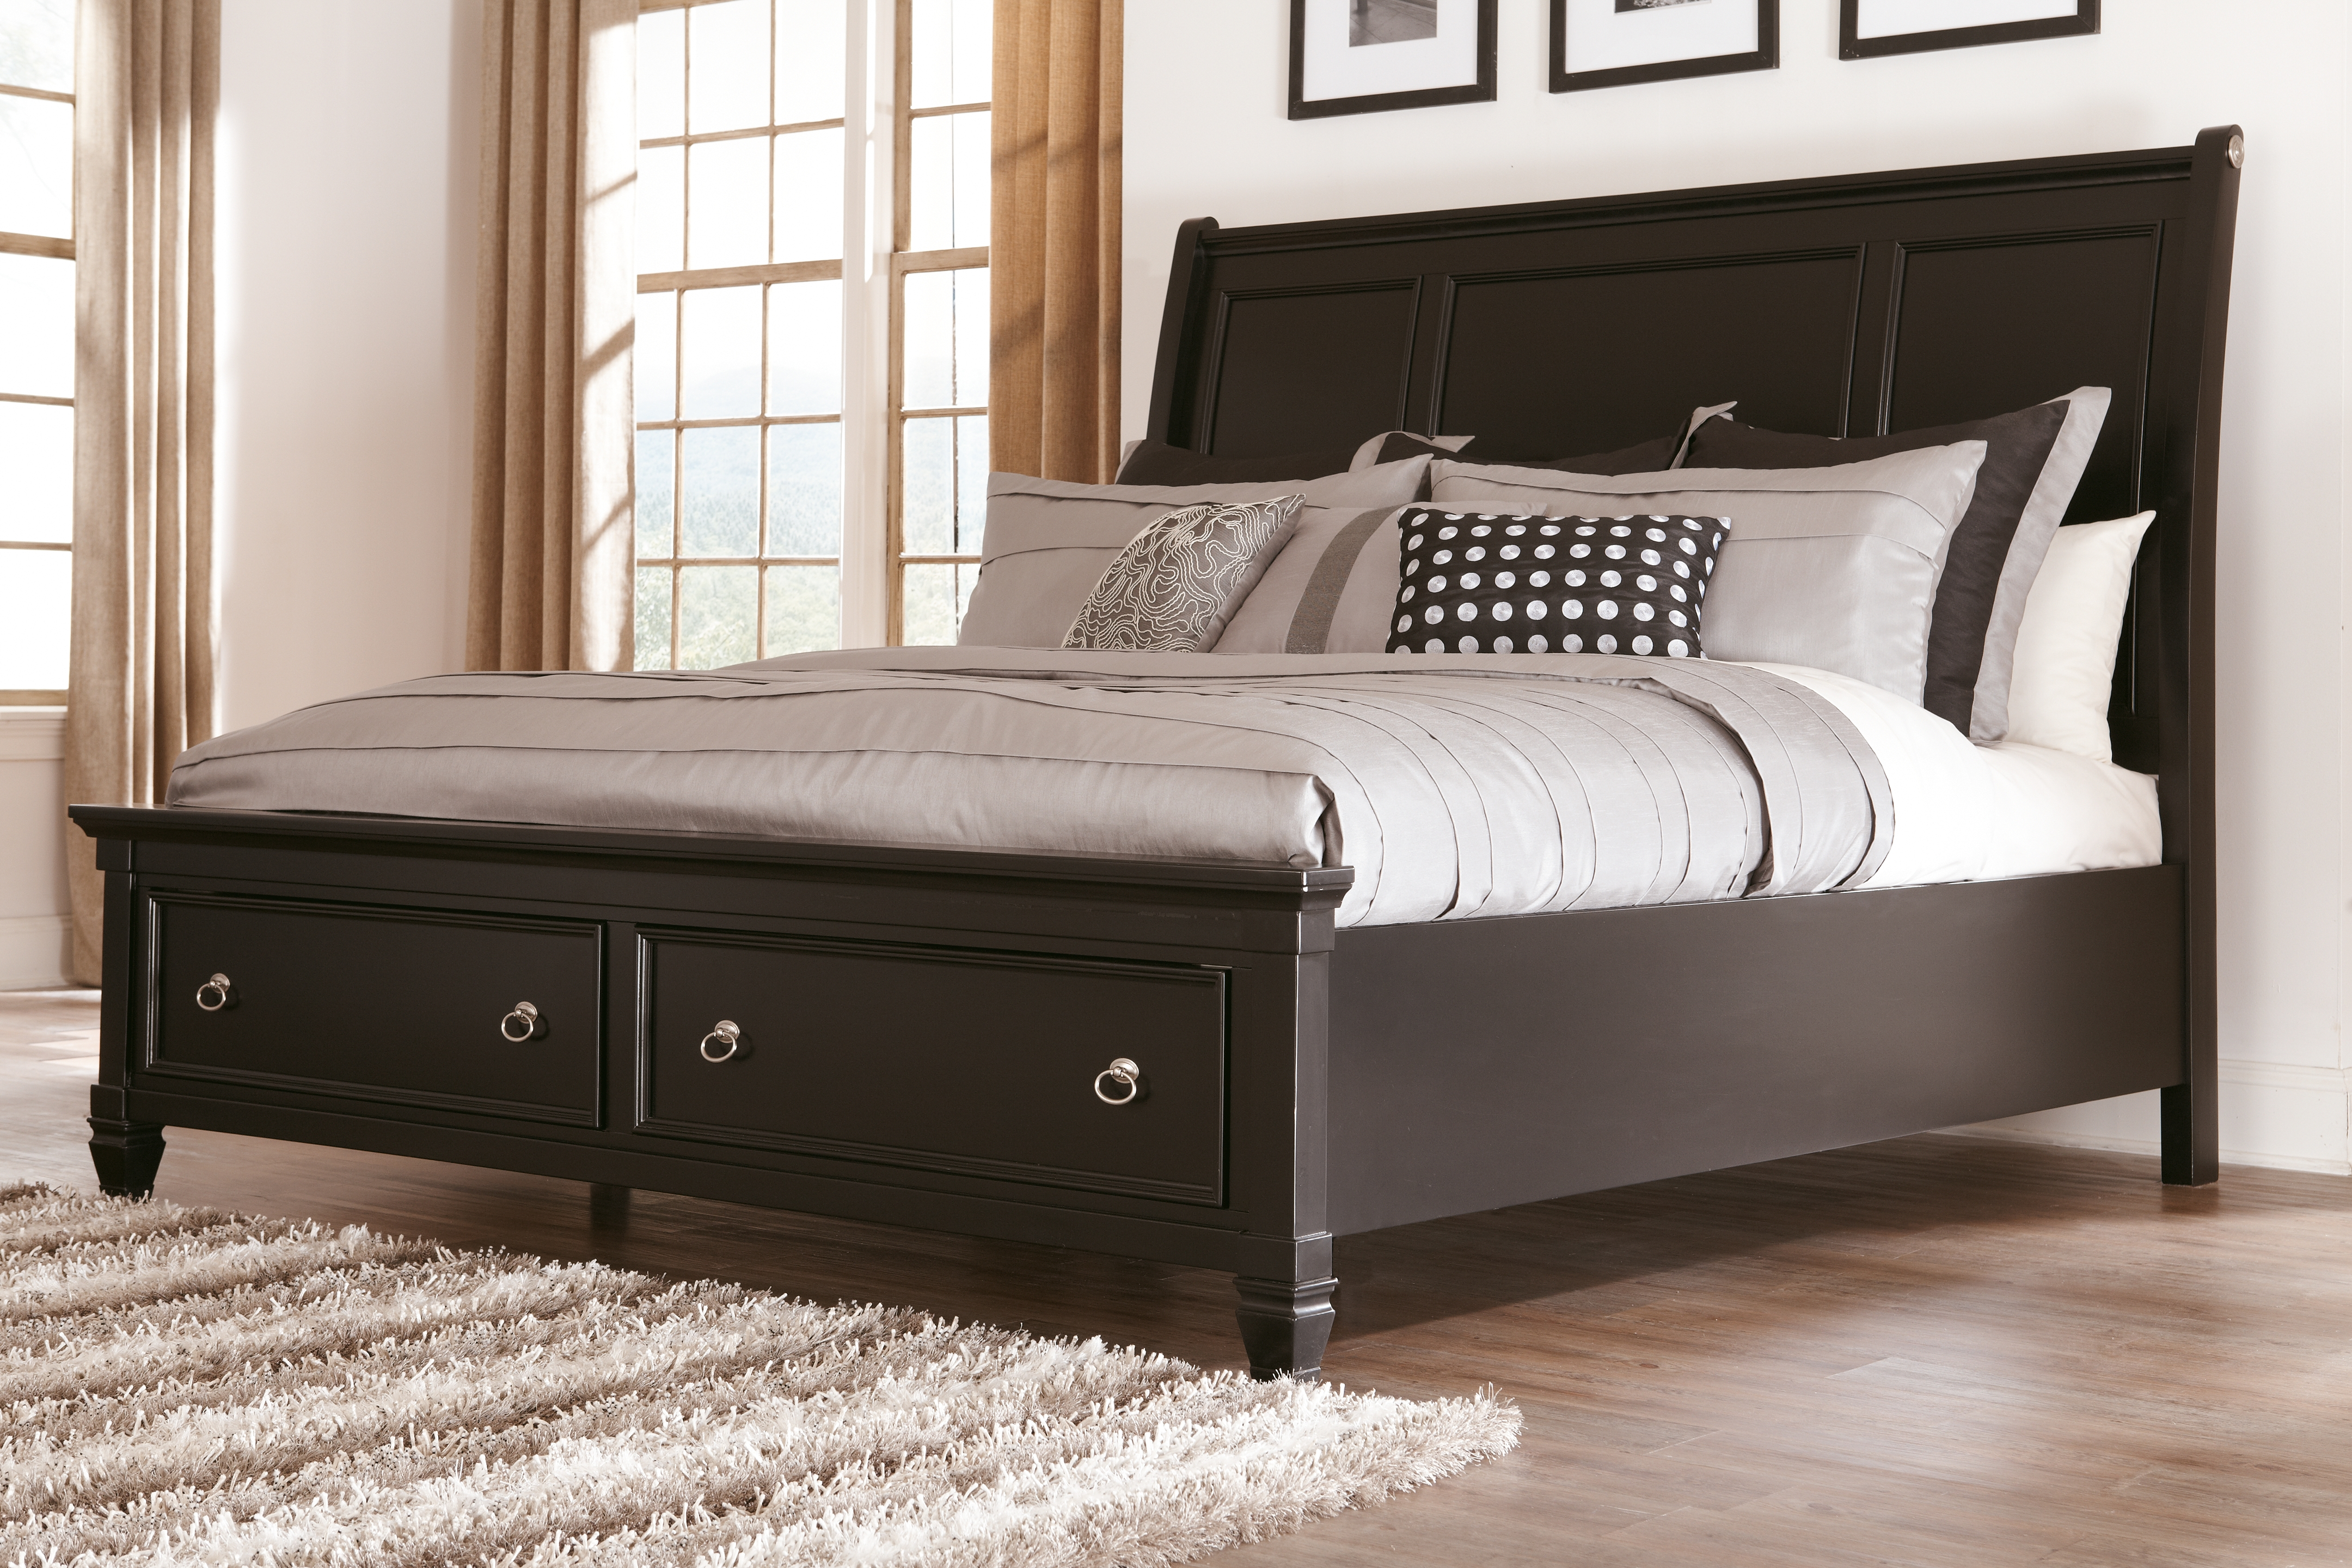 Greensburg Queen Sleigh Bed With Storage In 2019 Products King inside proportions 4320 X 2880